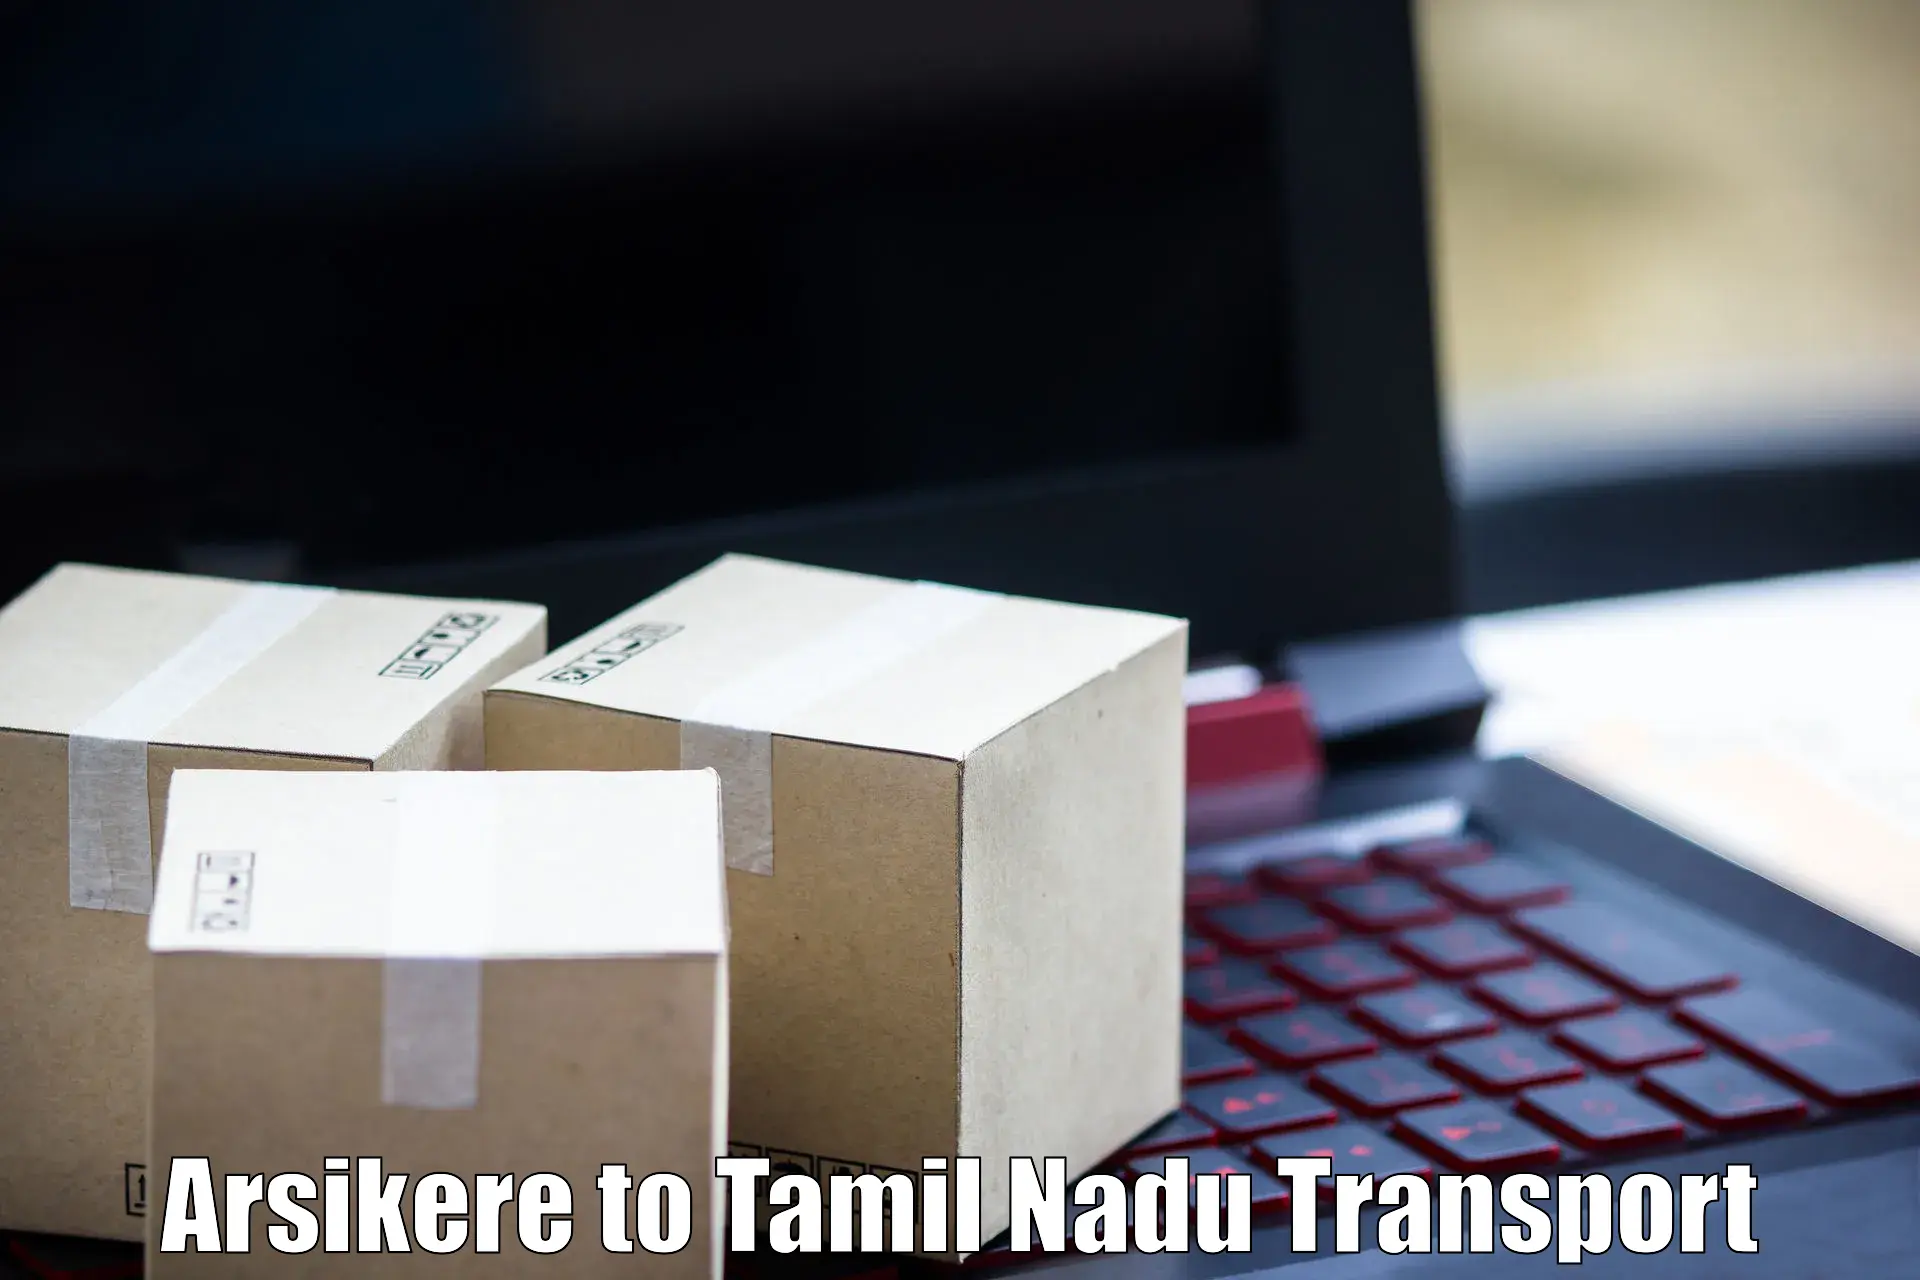 Transportation services Arsikere to SRM Institute of Science and Technology Chennai